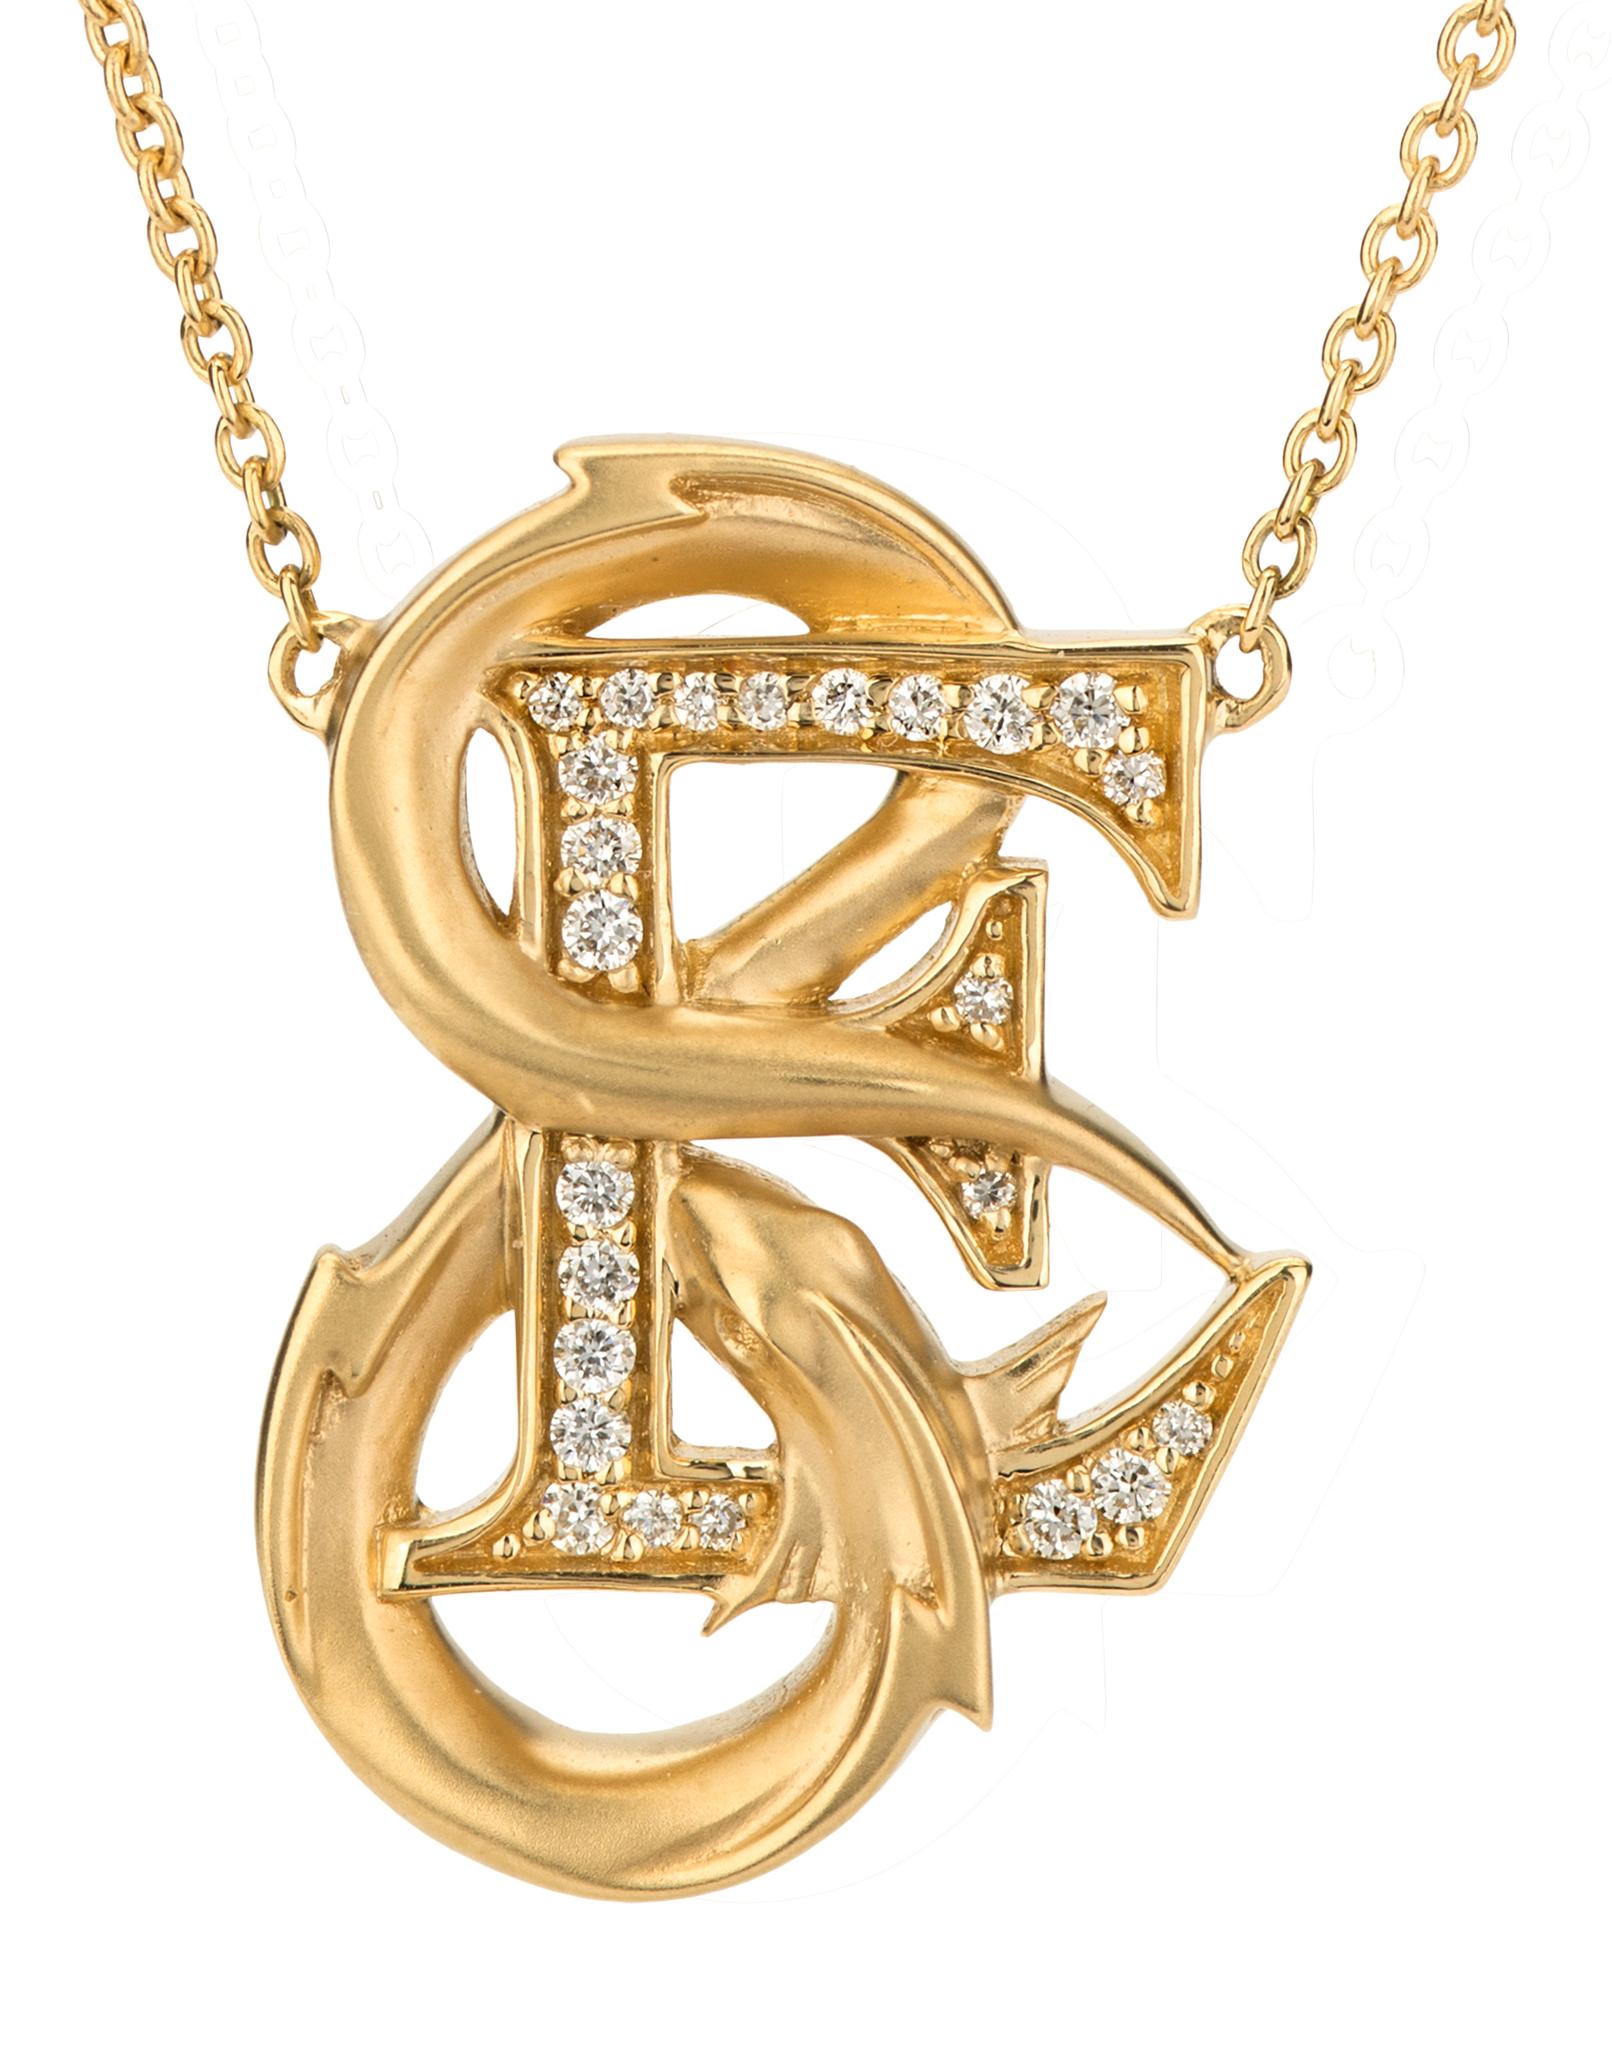 Watch out! There is an electric eel on the loose. Send shockwaves with our ‘E is for Electric Eel’ diamond necklace. Embrace your initials with our Fish Tales collection featuring a matt finish electric eel which surrounds an 18 karat yellow gold